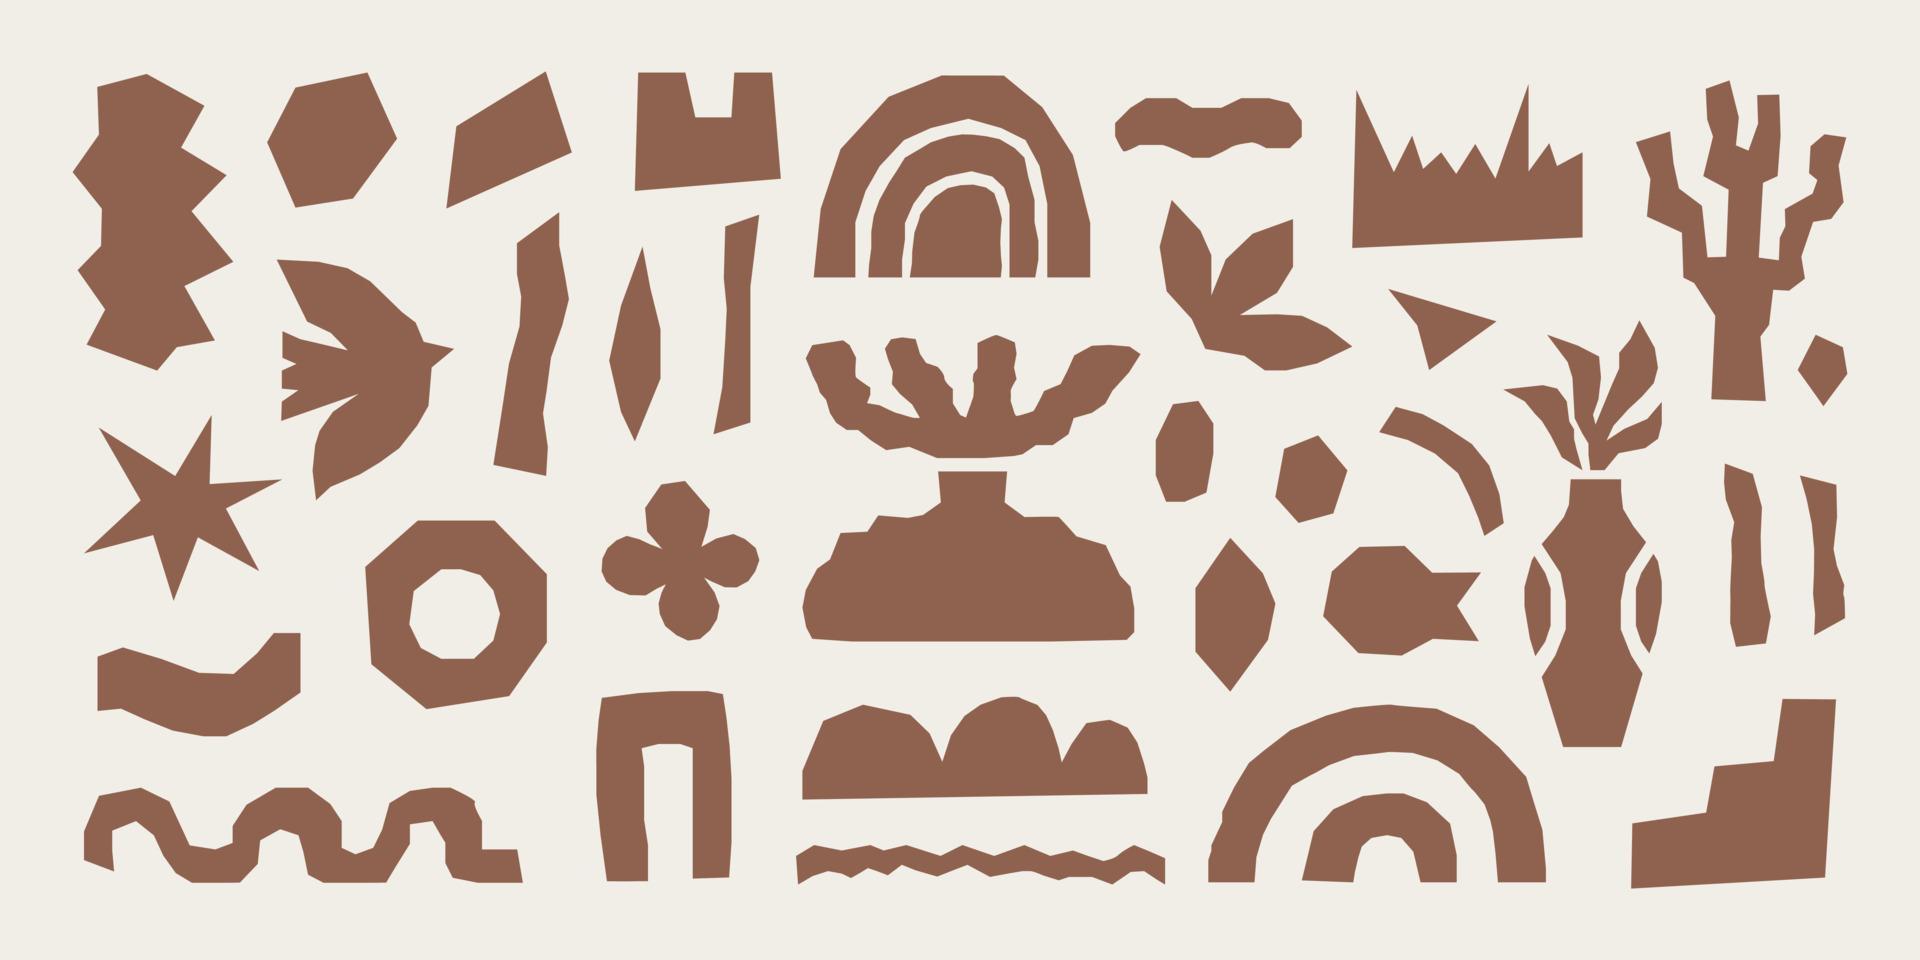 Inspired Matisse set with brown cutting organic shapes and objects. Modern creative minimal design. Vector illustration